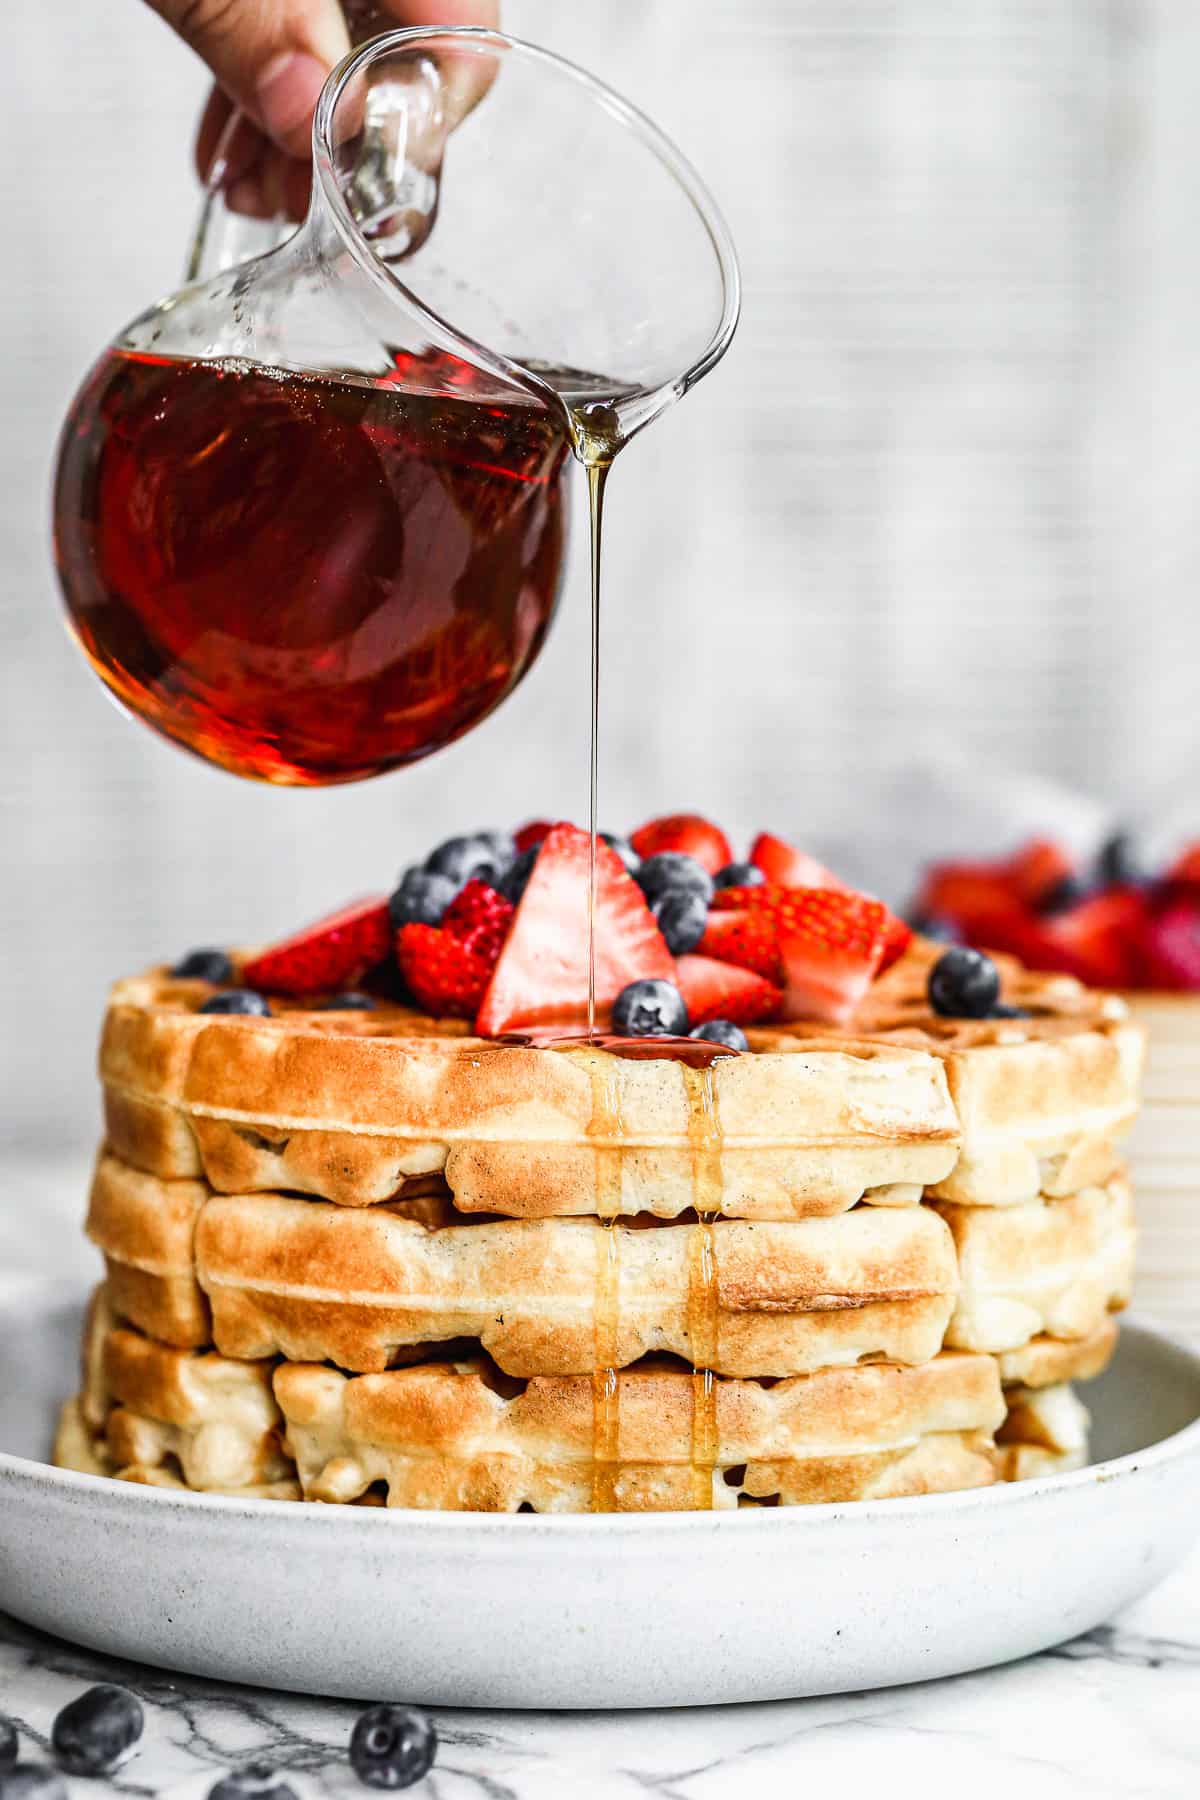 Maple syrup being poured on a stack of crispy yeasted waffles, topped with blueberries and sliced strawberries.